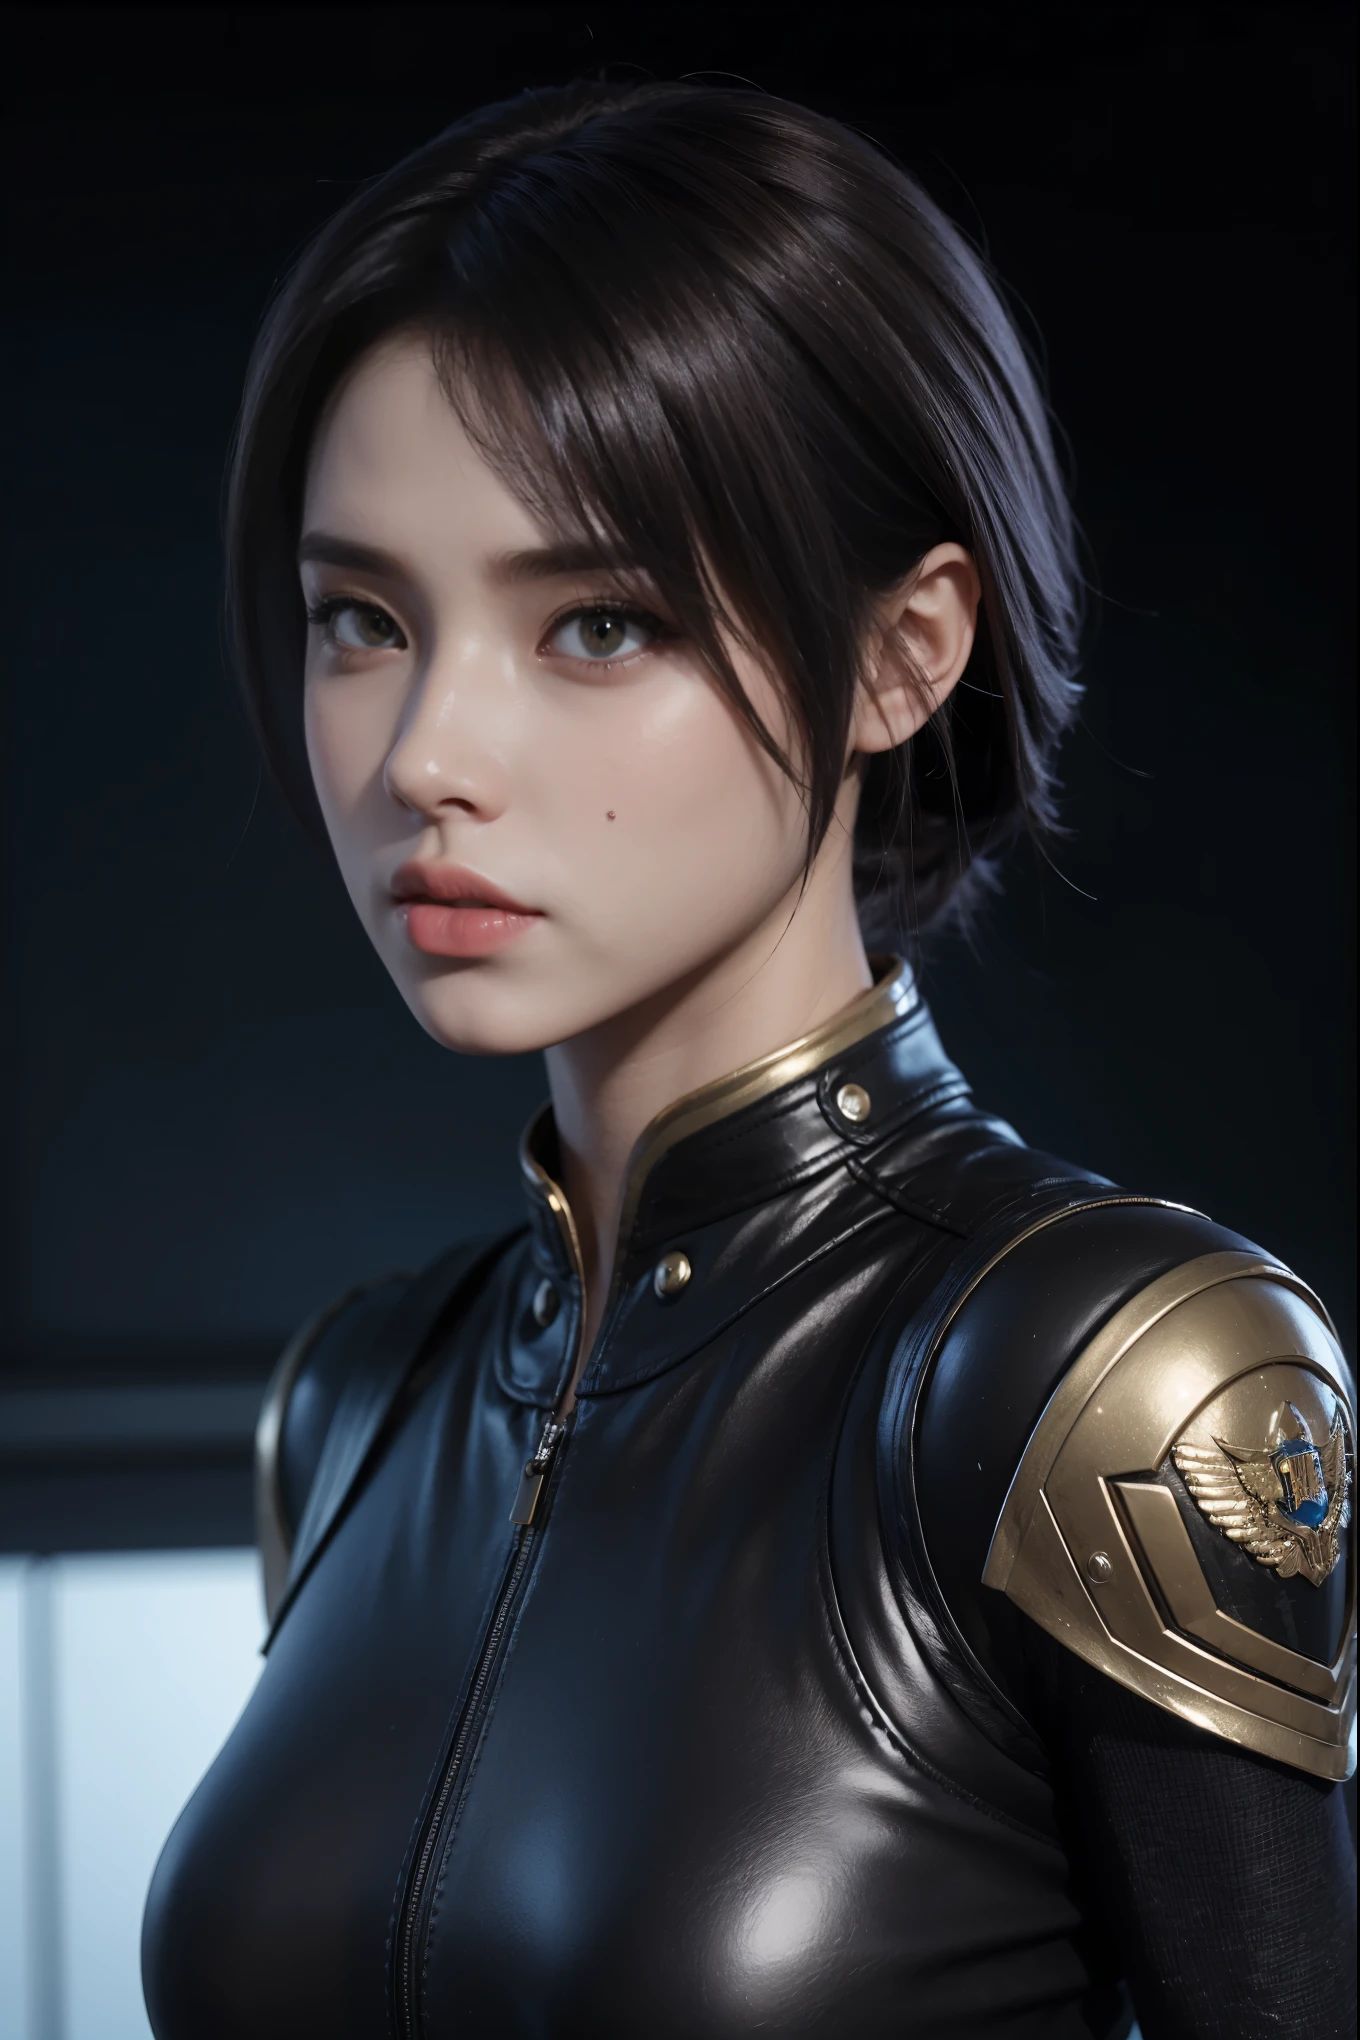 Masterpiece，The best qualities，Very high resolution，8K，((Portrait))，((Head close-up))，Original photo，real photo，Digital Photography， (Cyberpunk-style female cops of the future world)，(Fighting girl)，22-year-old girl，(A random style of short hair)，An eye rich in detail，((Lachrymal nevus))，lip gloss，(Elegant and charming，Indifferent and noble)，(Future combat clothing full of mechanical style，A garment that combines the characteristics of a police uniform，A fancy badge，An intricate pattern of clothing，Glittering jewels，Joint Armor，Metallic luster，Red and white)，Cyberpunk Characters，Future Style， Photo poses，Street background，Movie lights，Ray tracing，Game CG，((3D Unreal Engine))，oc rendering reflection texture